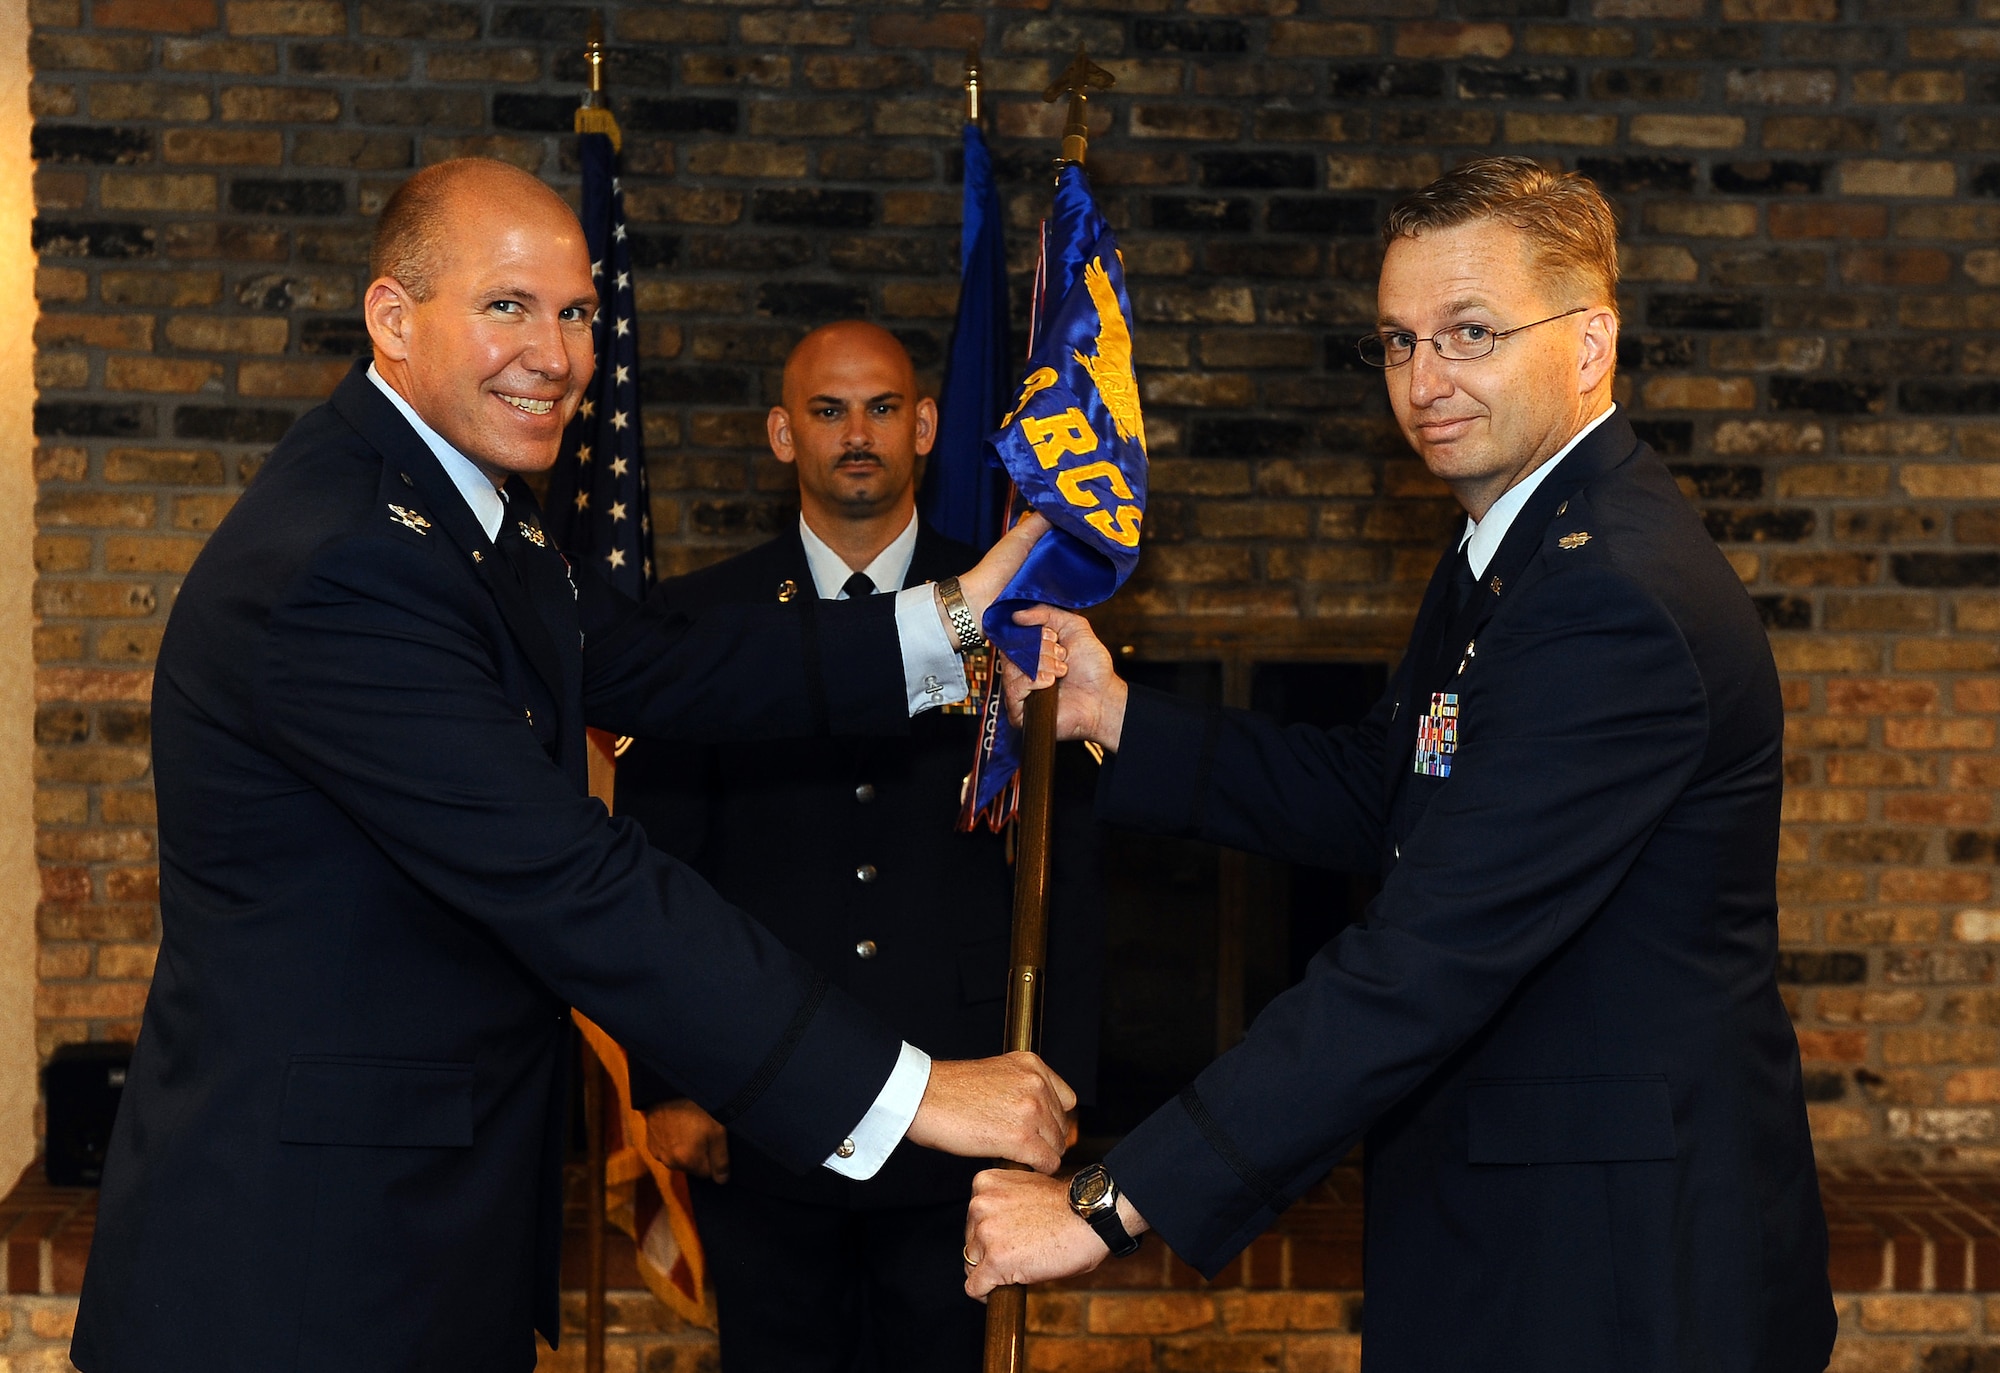 Air Force Lt. Col. Stephen A. Polomsky, (right), assumes command of the 343d Recruiting Squadron during a change-of-command ceremony held at the Community Center on Offutt Air Force Base, Neb., July 14. Col. Michael E. Vlk, commander of the 372d Recruiting Group, presided over the ceremony welcoming Polomsky to the Wolfpack.  (U.S. Air Force Photo by Josh Plueger/ Released)